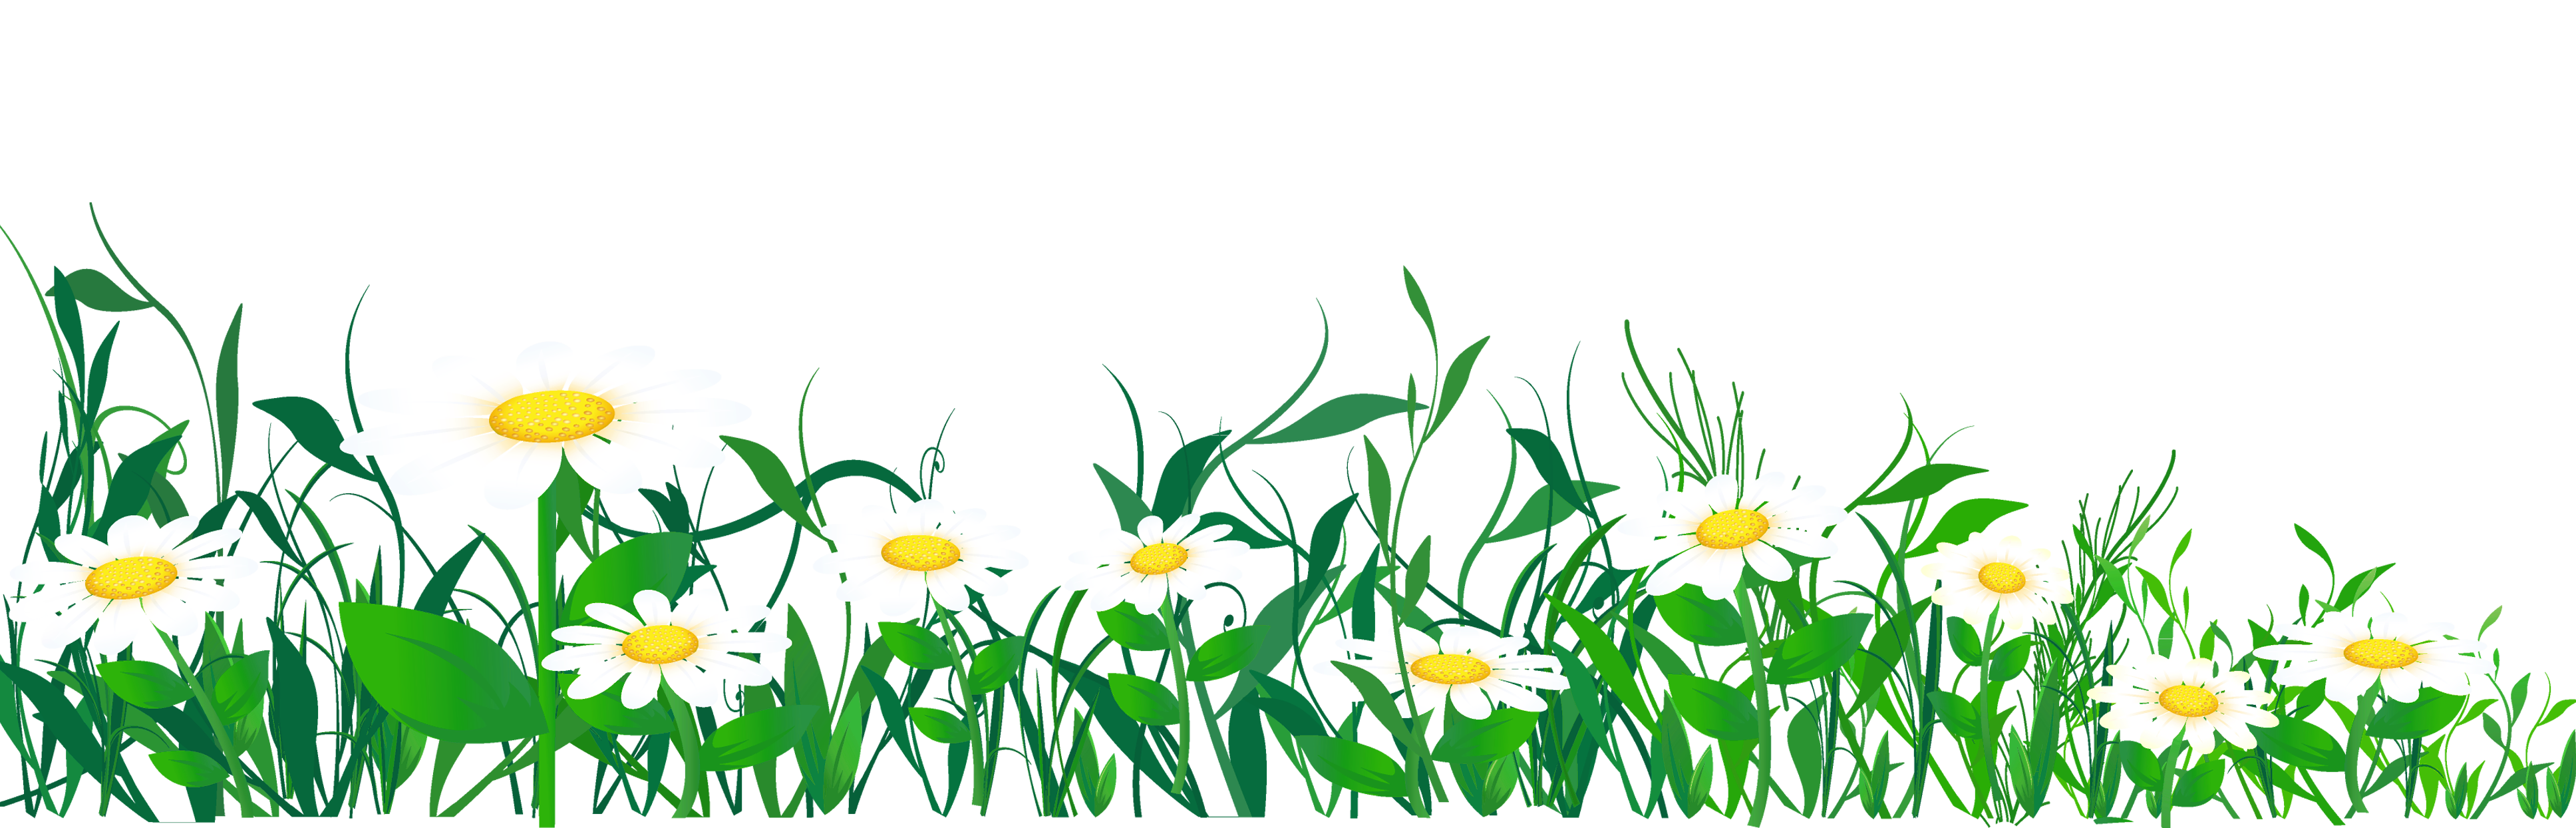 Common daisy Clip art - Daisies and Grass PNG Clipart Picture png ...